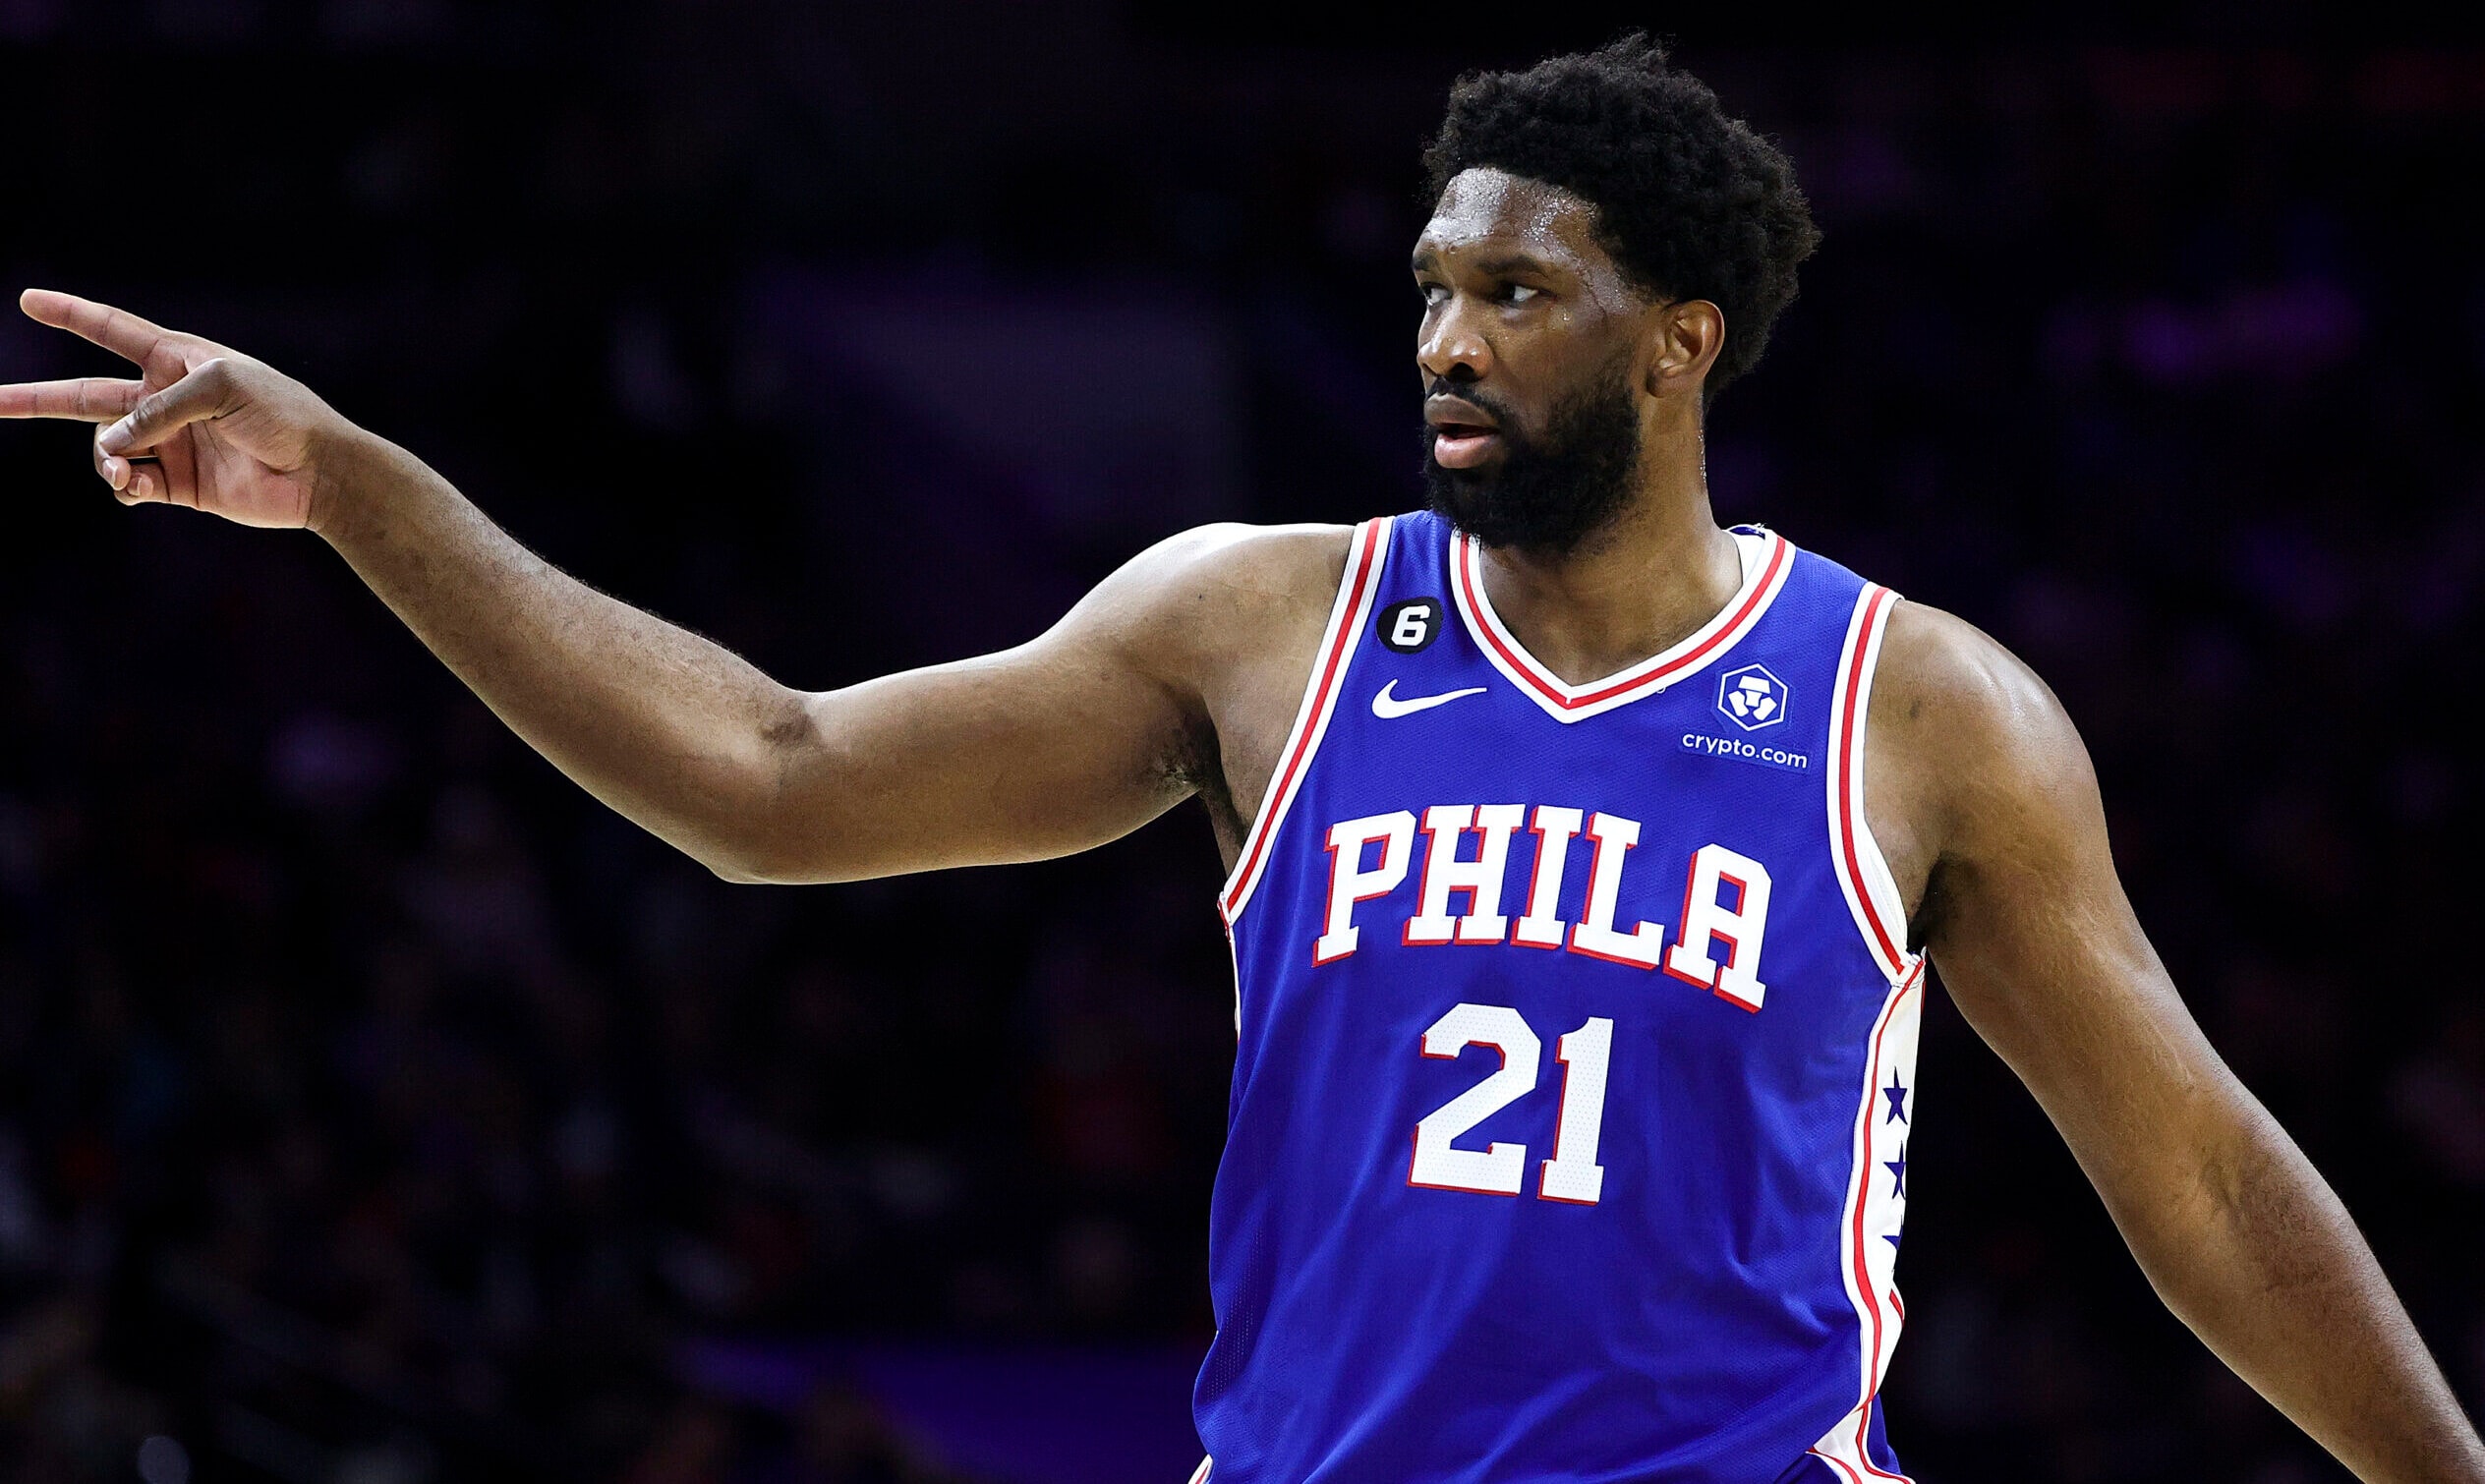 Joel Embiid,
Sixers' Joel Embiid Trade To The Knick May Happen